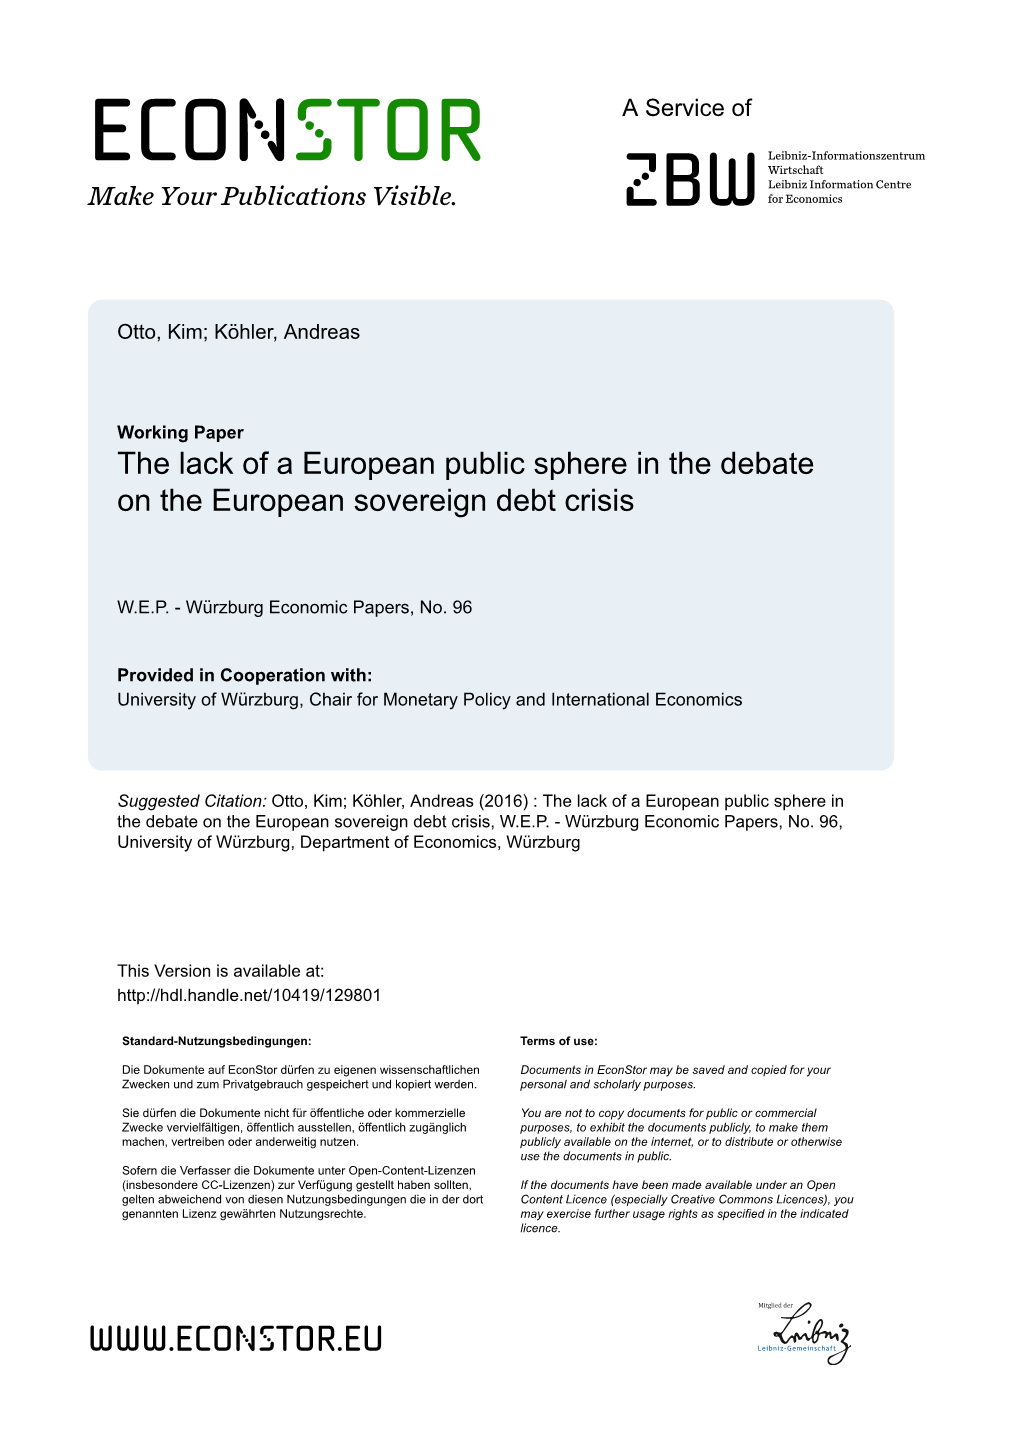 The Lack of a European Public Sphere in the Debate on the European Sovereign Debt Crisis